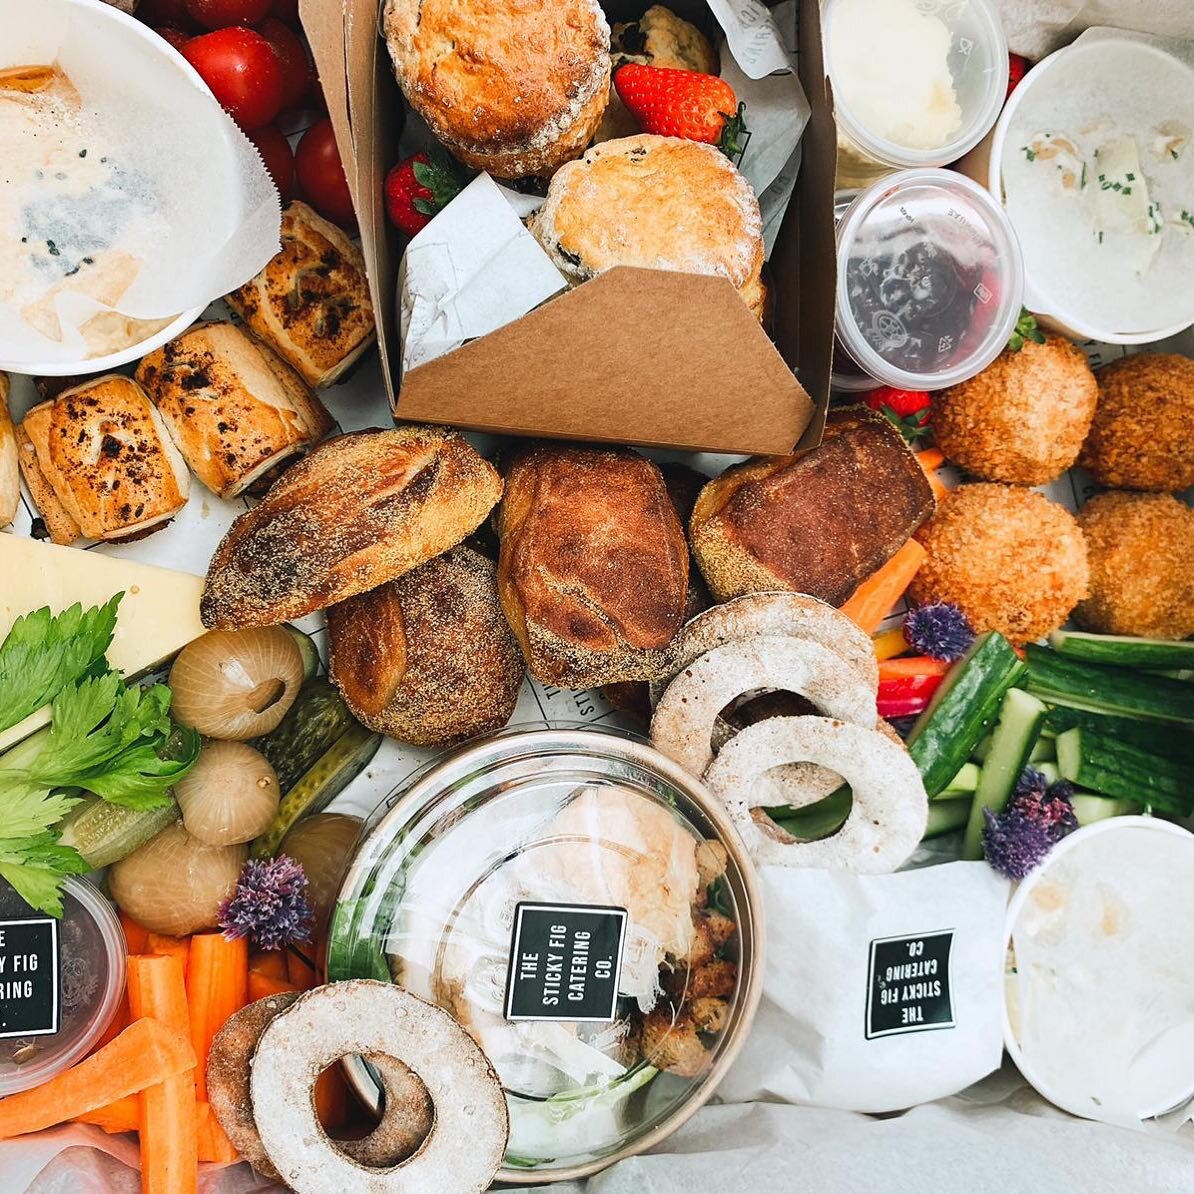 Our delicious picnic boxes are the perfect treat to enjoy in the sunshine or in your back garden. Brimming with homemade treats made from the team @sticky_fig_catering 

Sustainably packaged picnics using innovative food packaging made from recycled 